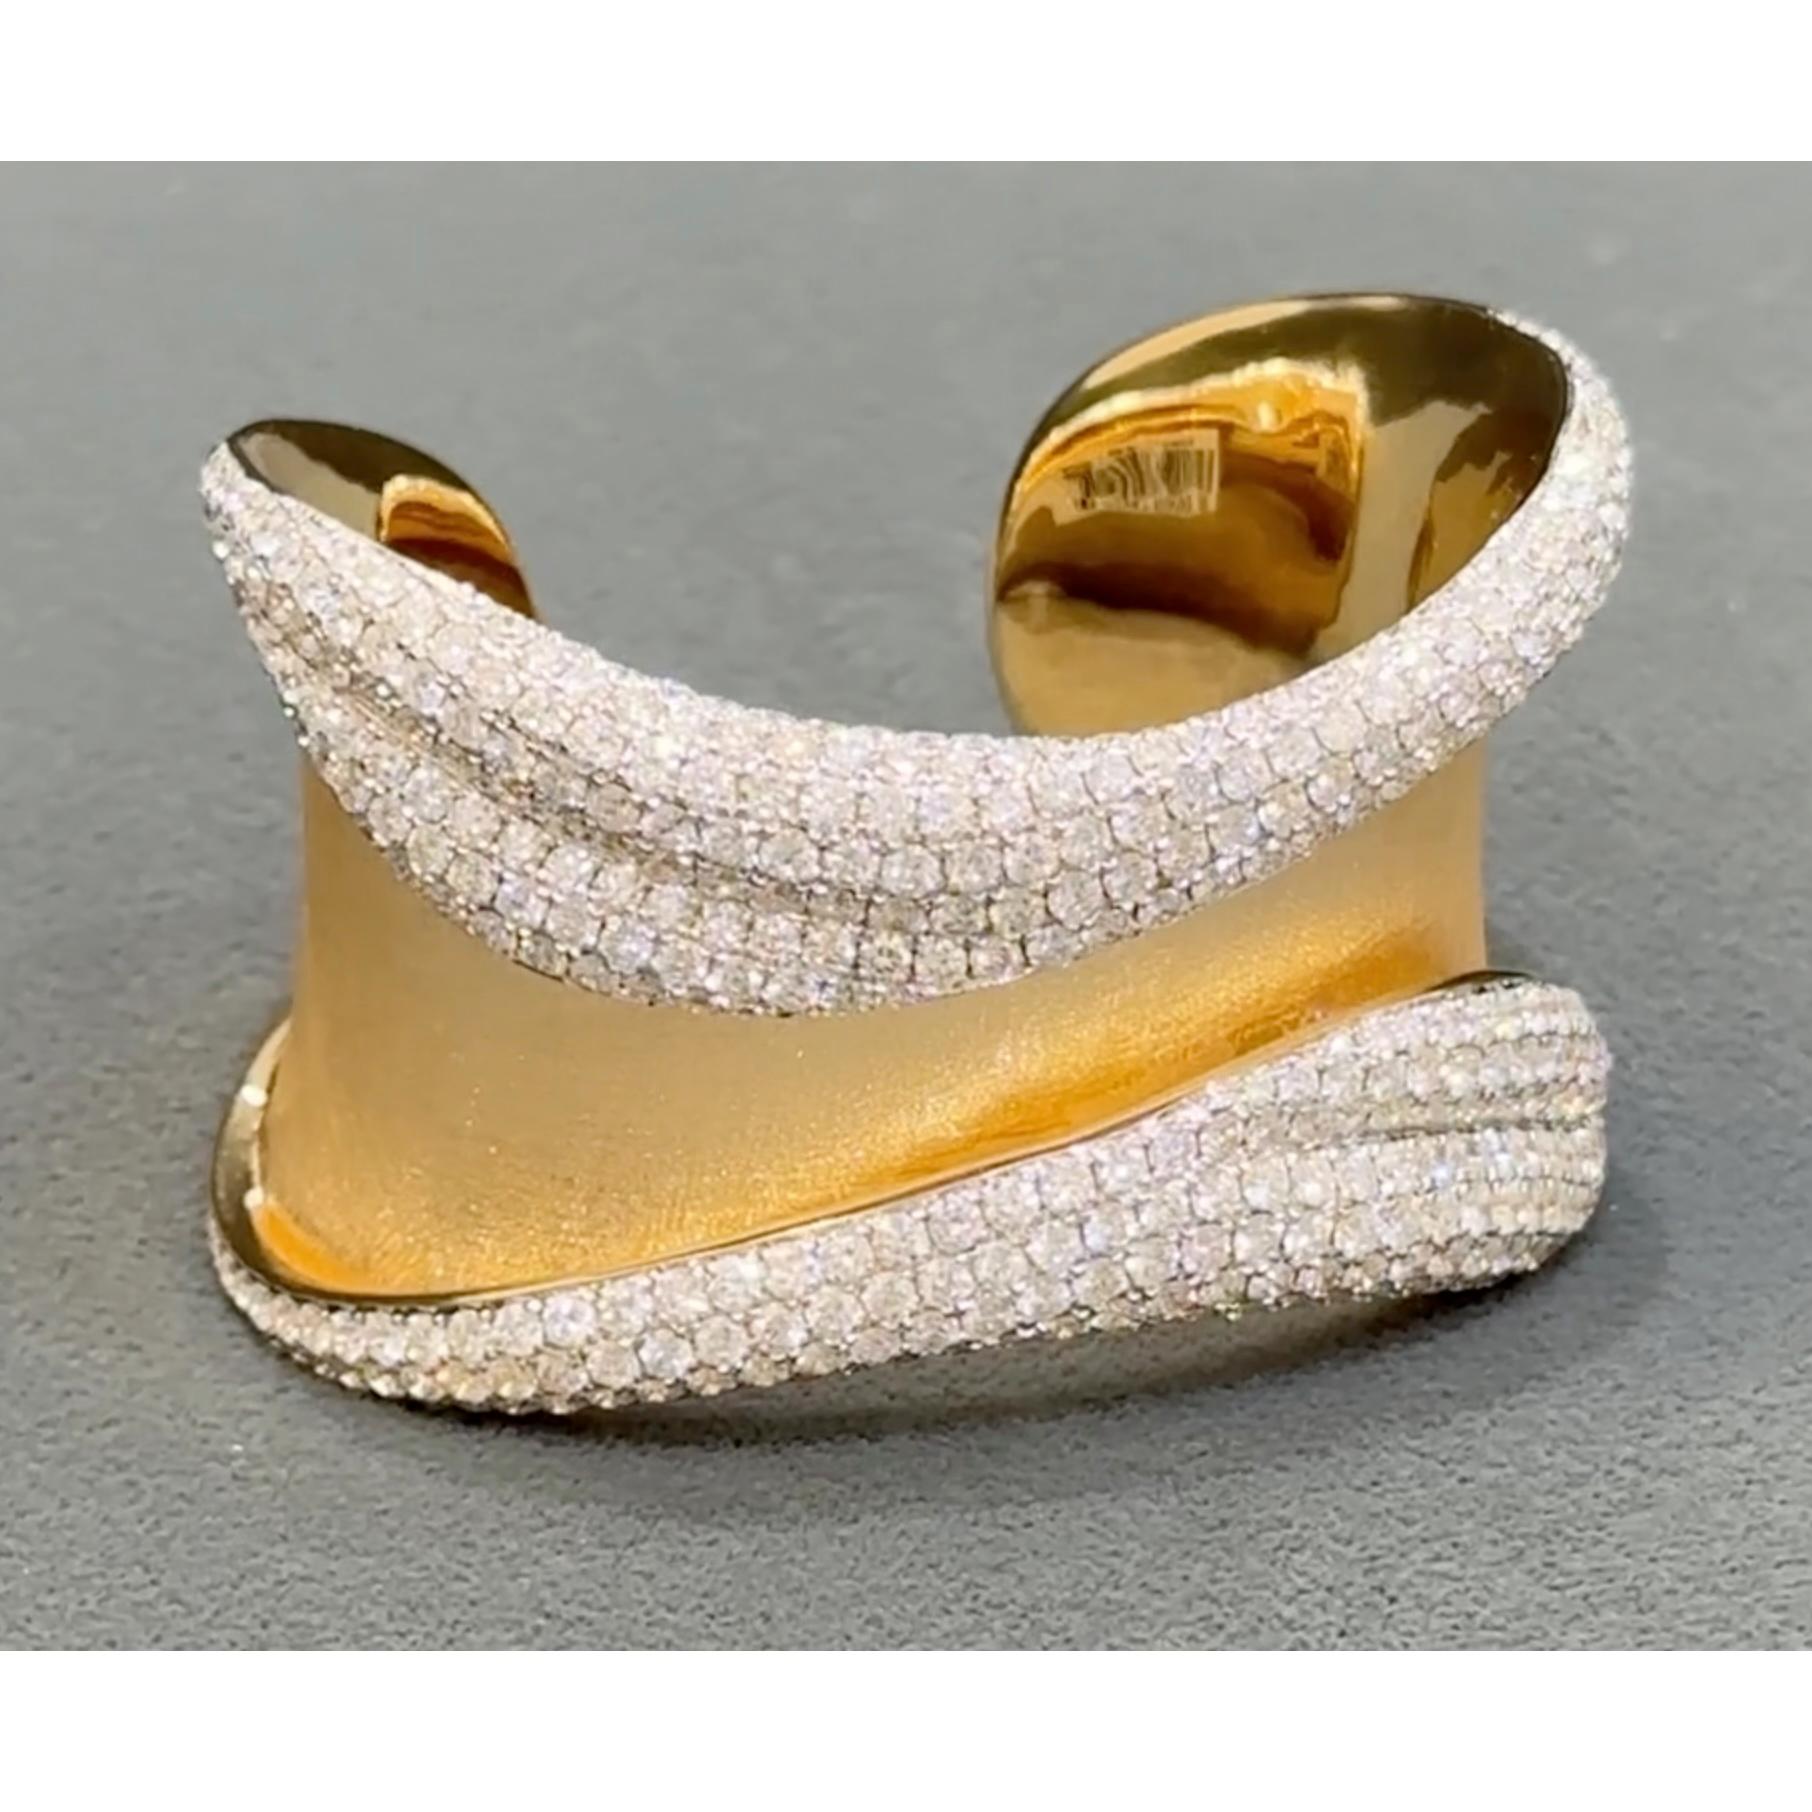 Magnificent Heavy 18k Cuff Bracelet In New Condition For Sale In Sarasota, FL